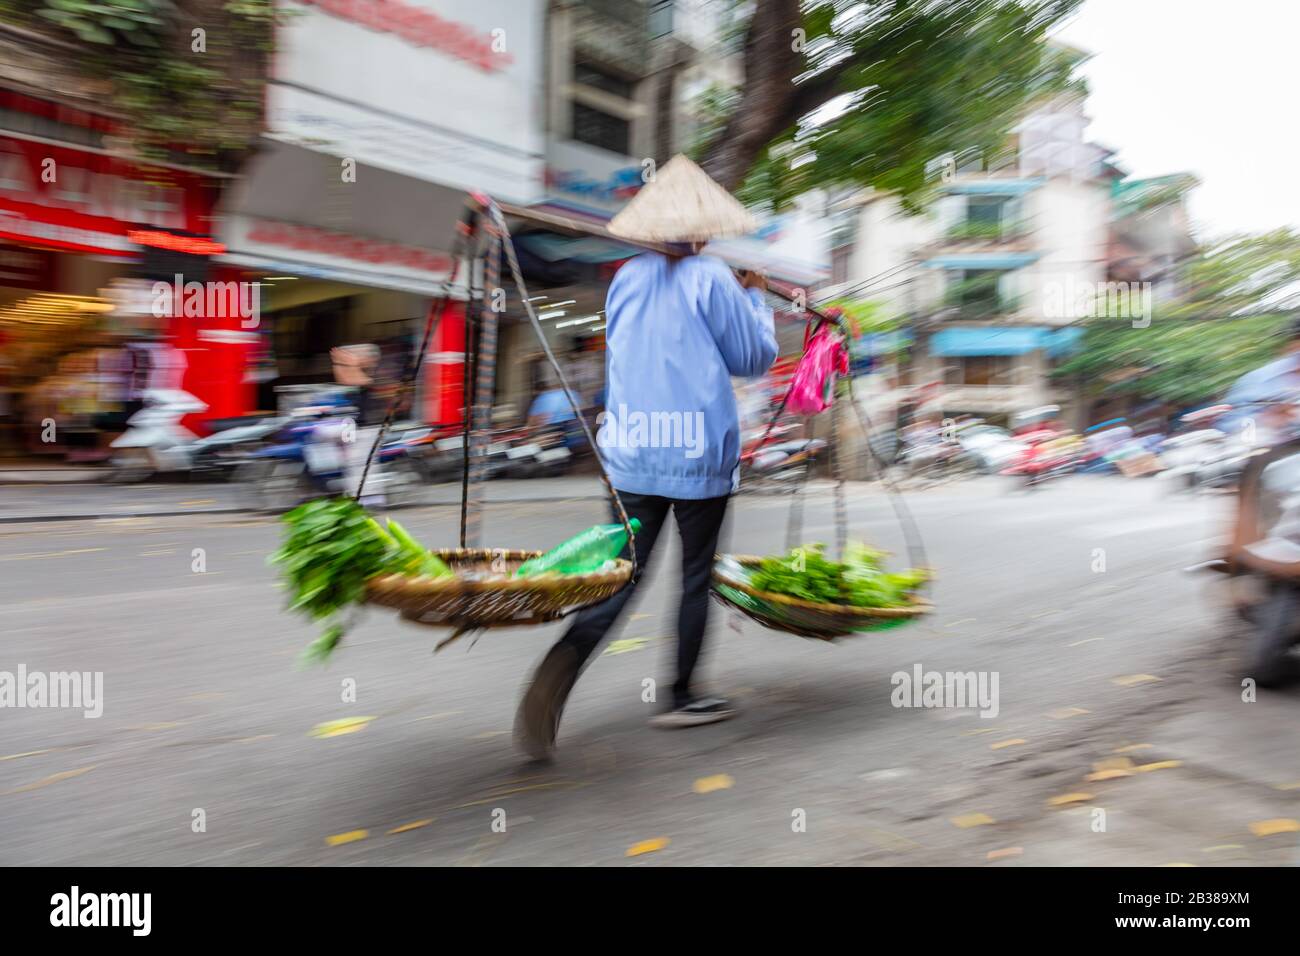 Motion blurred photograph of local Vietnamese woman selling vegetables from baskets on the streets of Hanoi, Vietnam, South East Asia Stock Photo